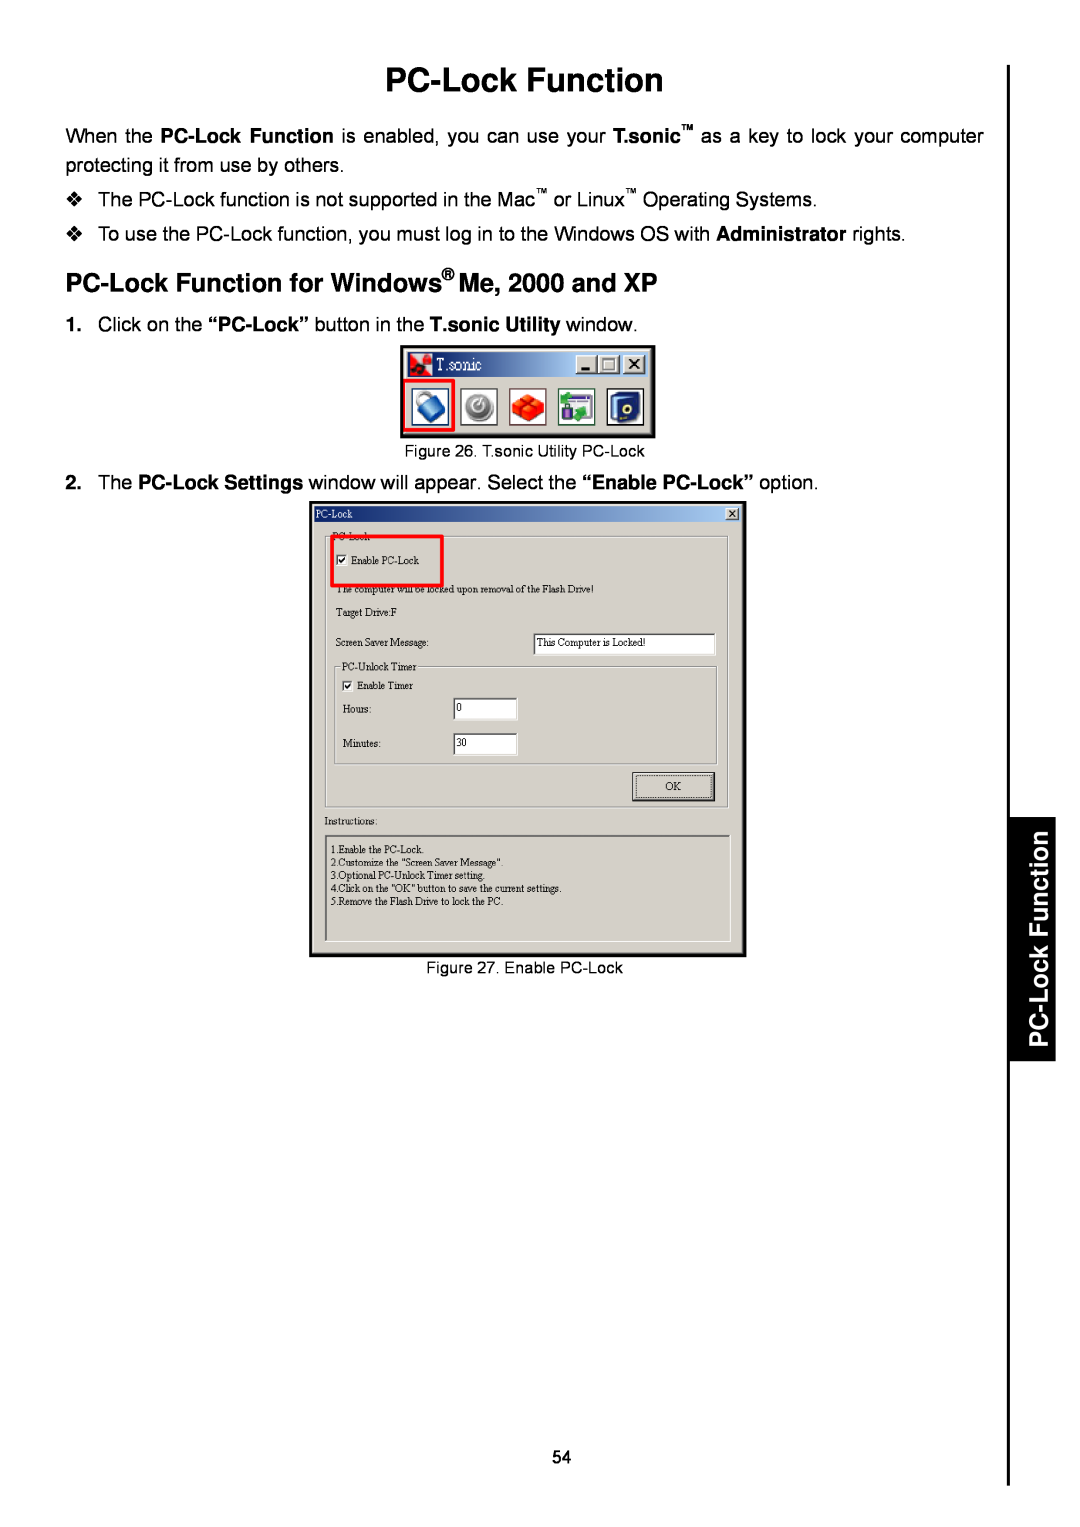 Transcend Information 820 user manual PC-LockFunction for Windows Me, 2000 and XP 